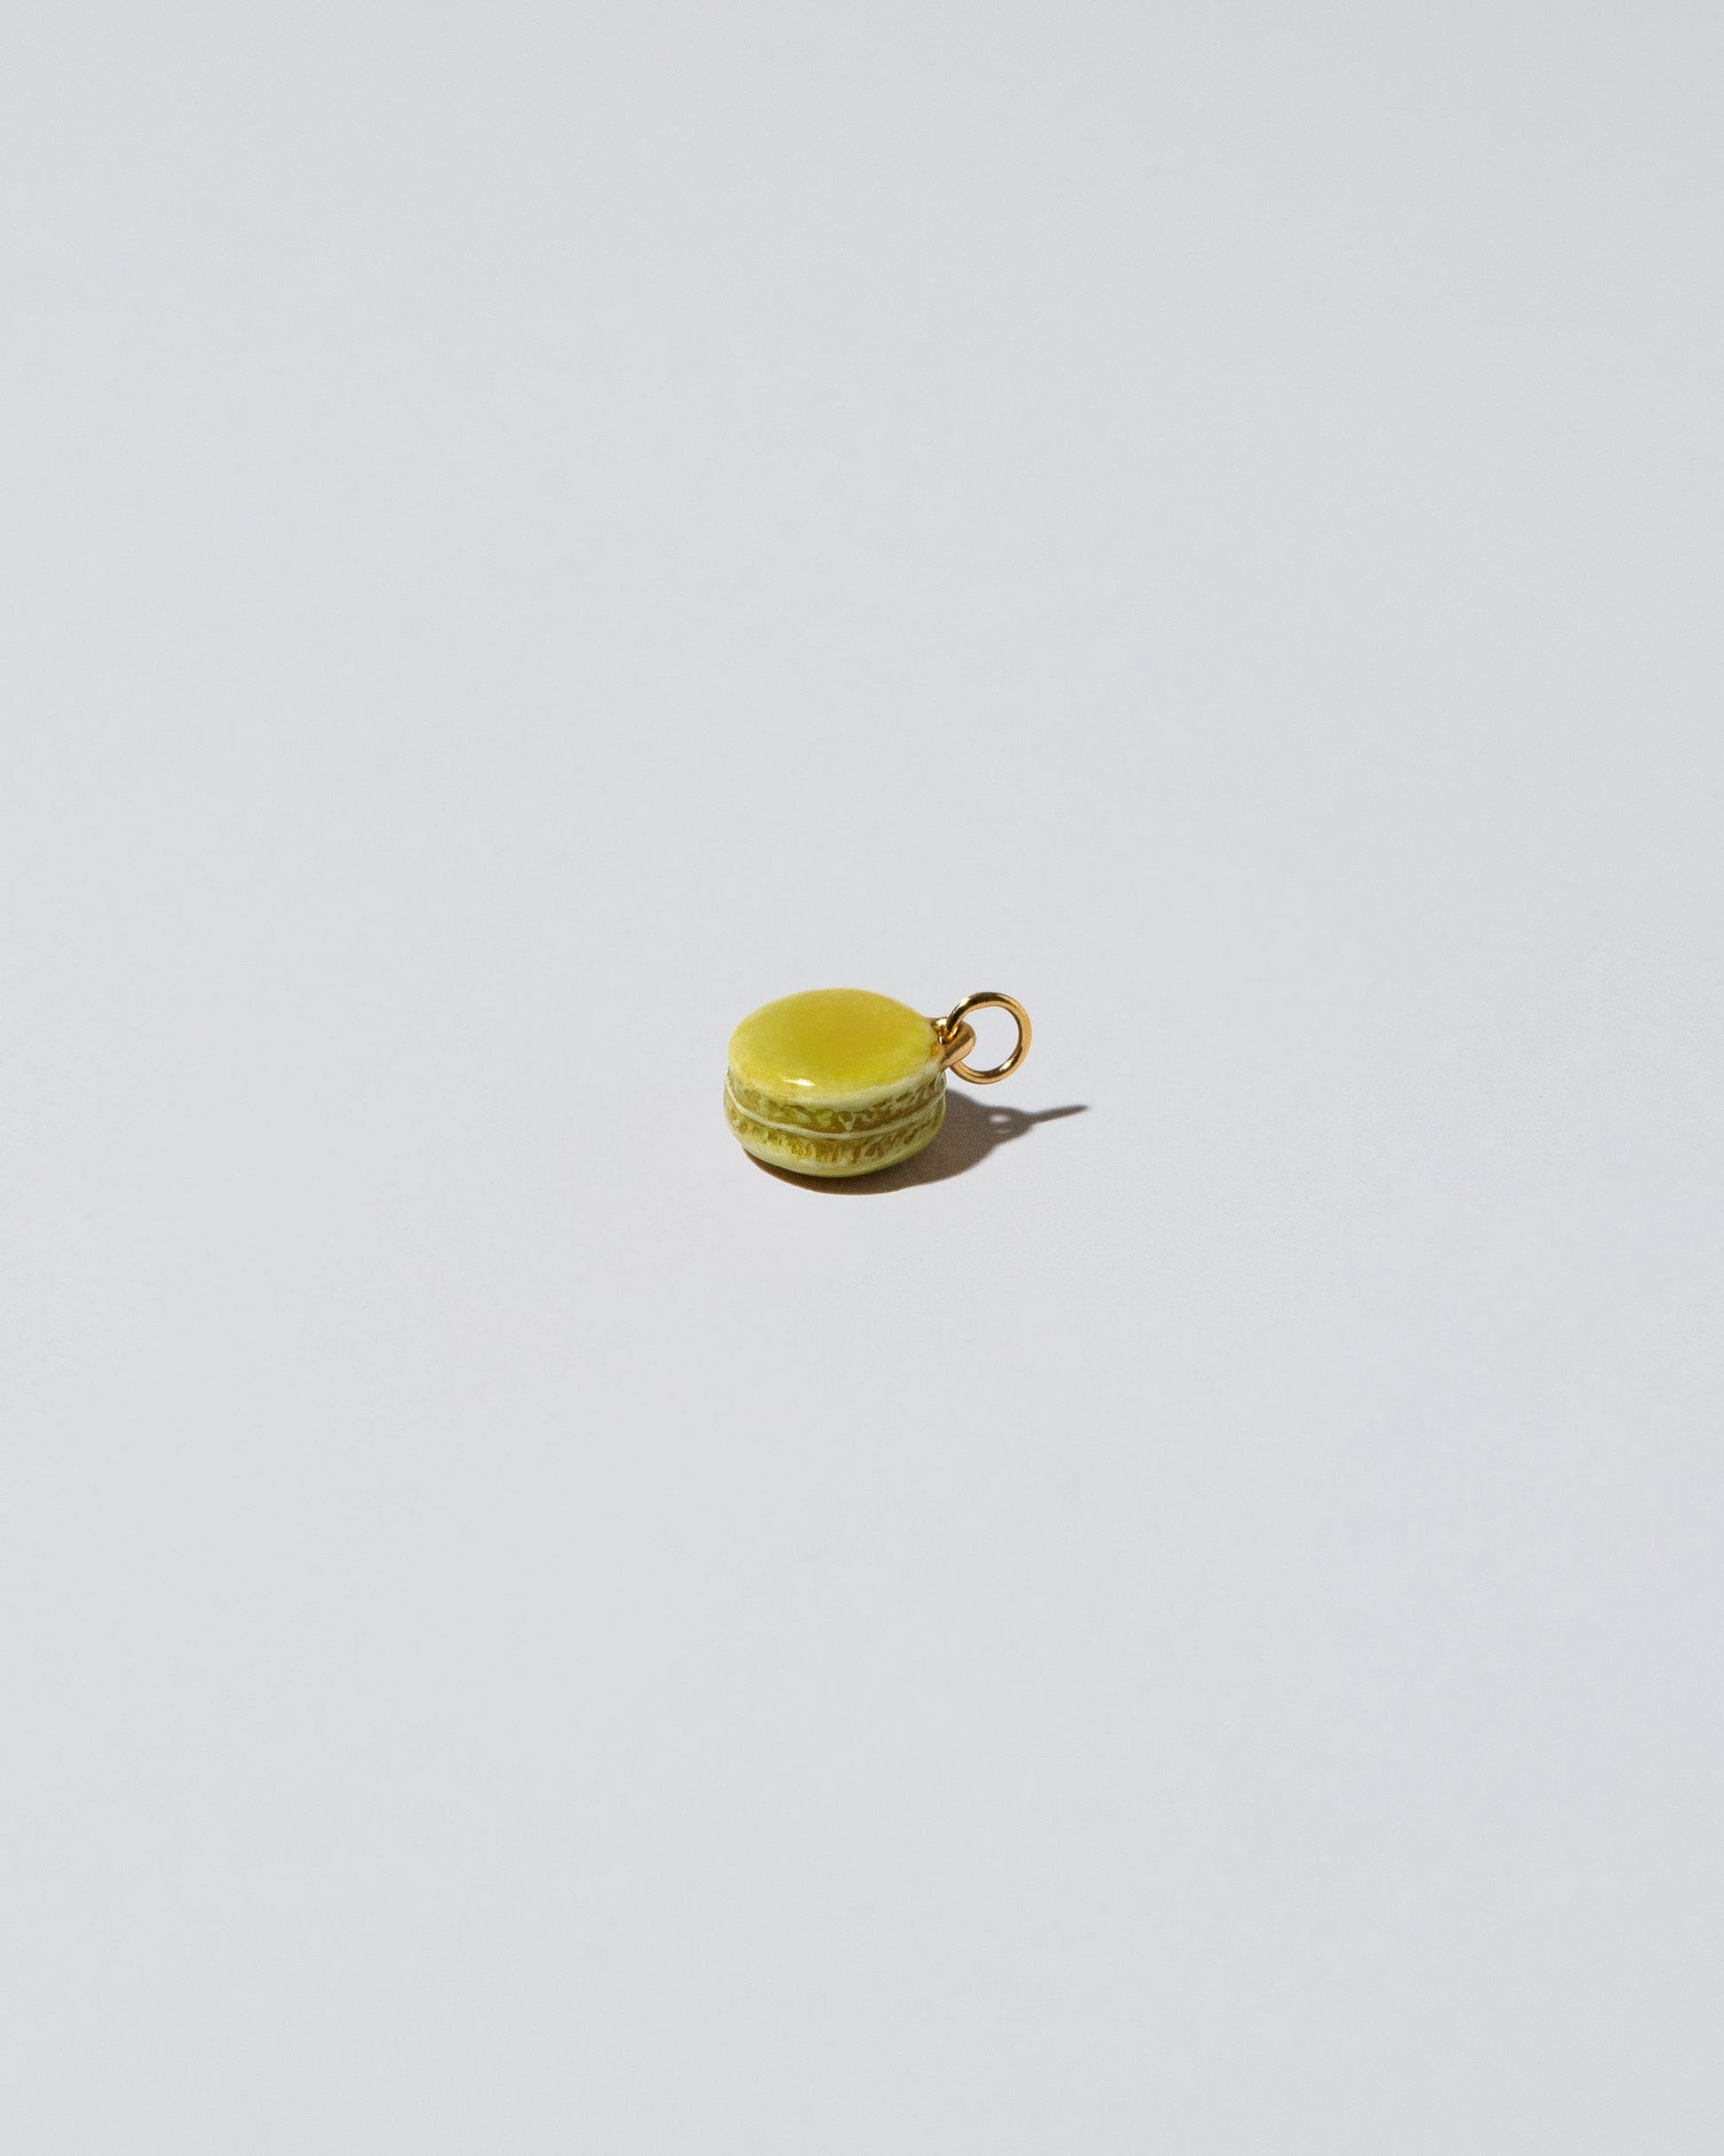 Product photo of Macaron Charm in pistachio on light co